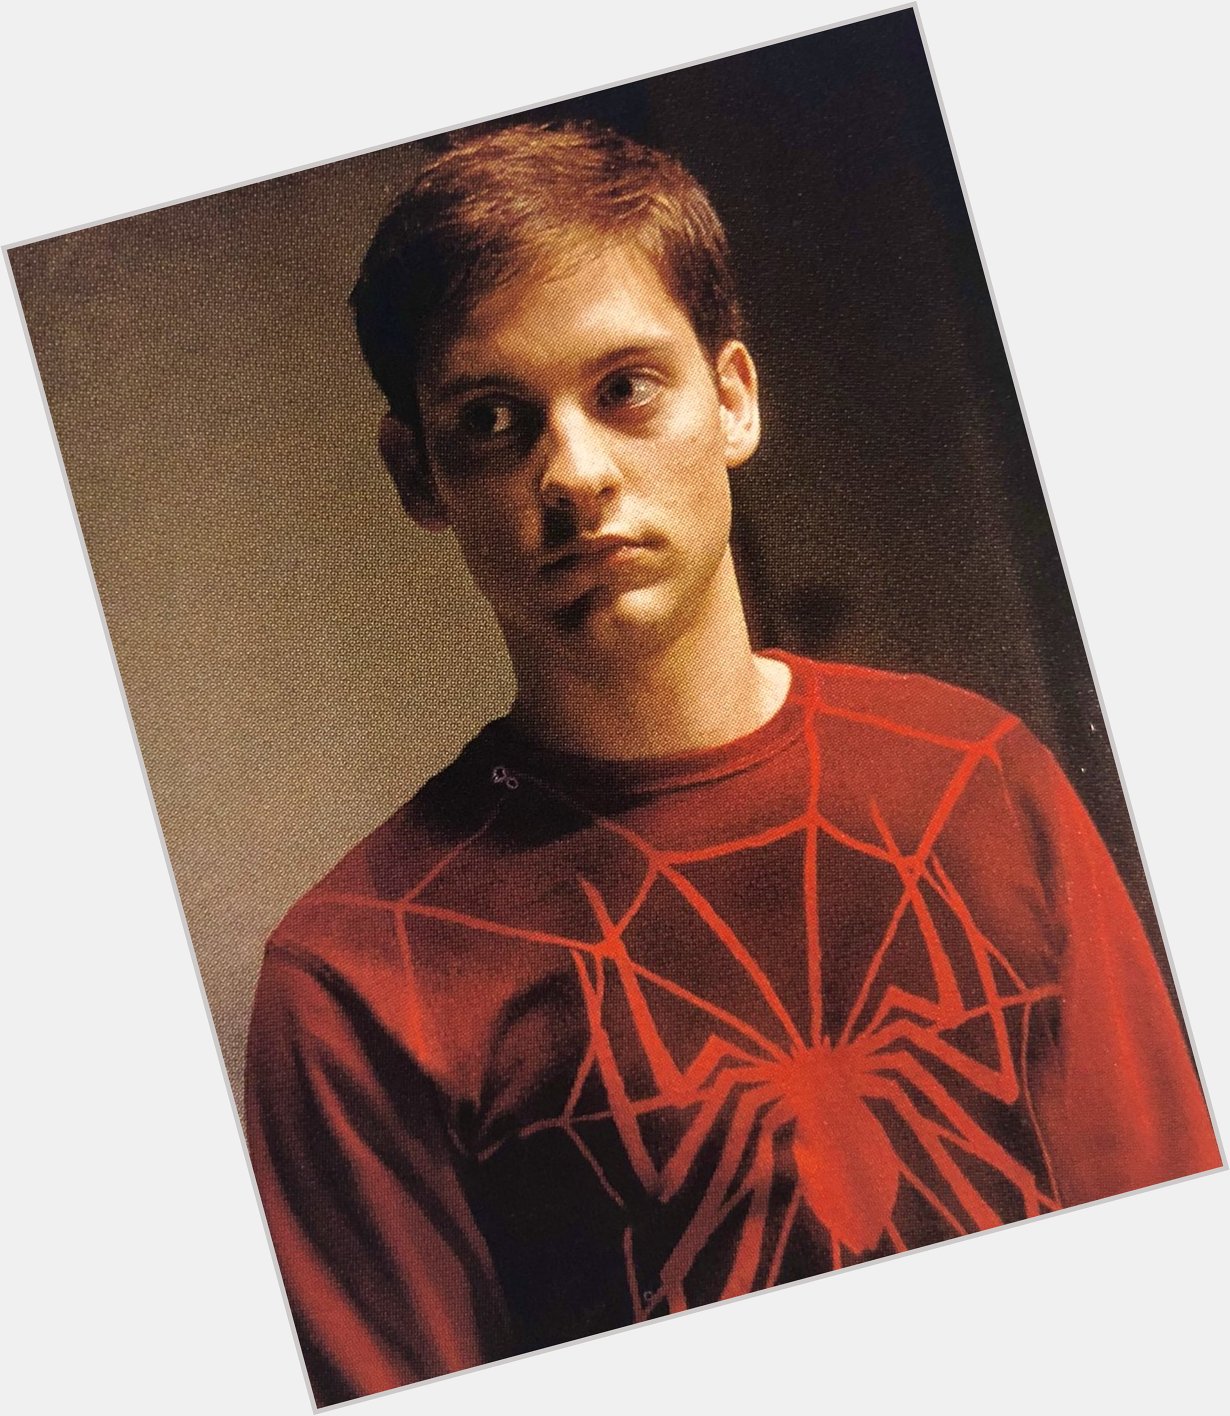 Happy 48th Birthday to Tobey Maguire! 